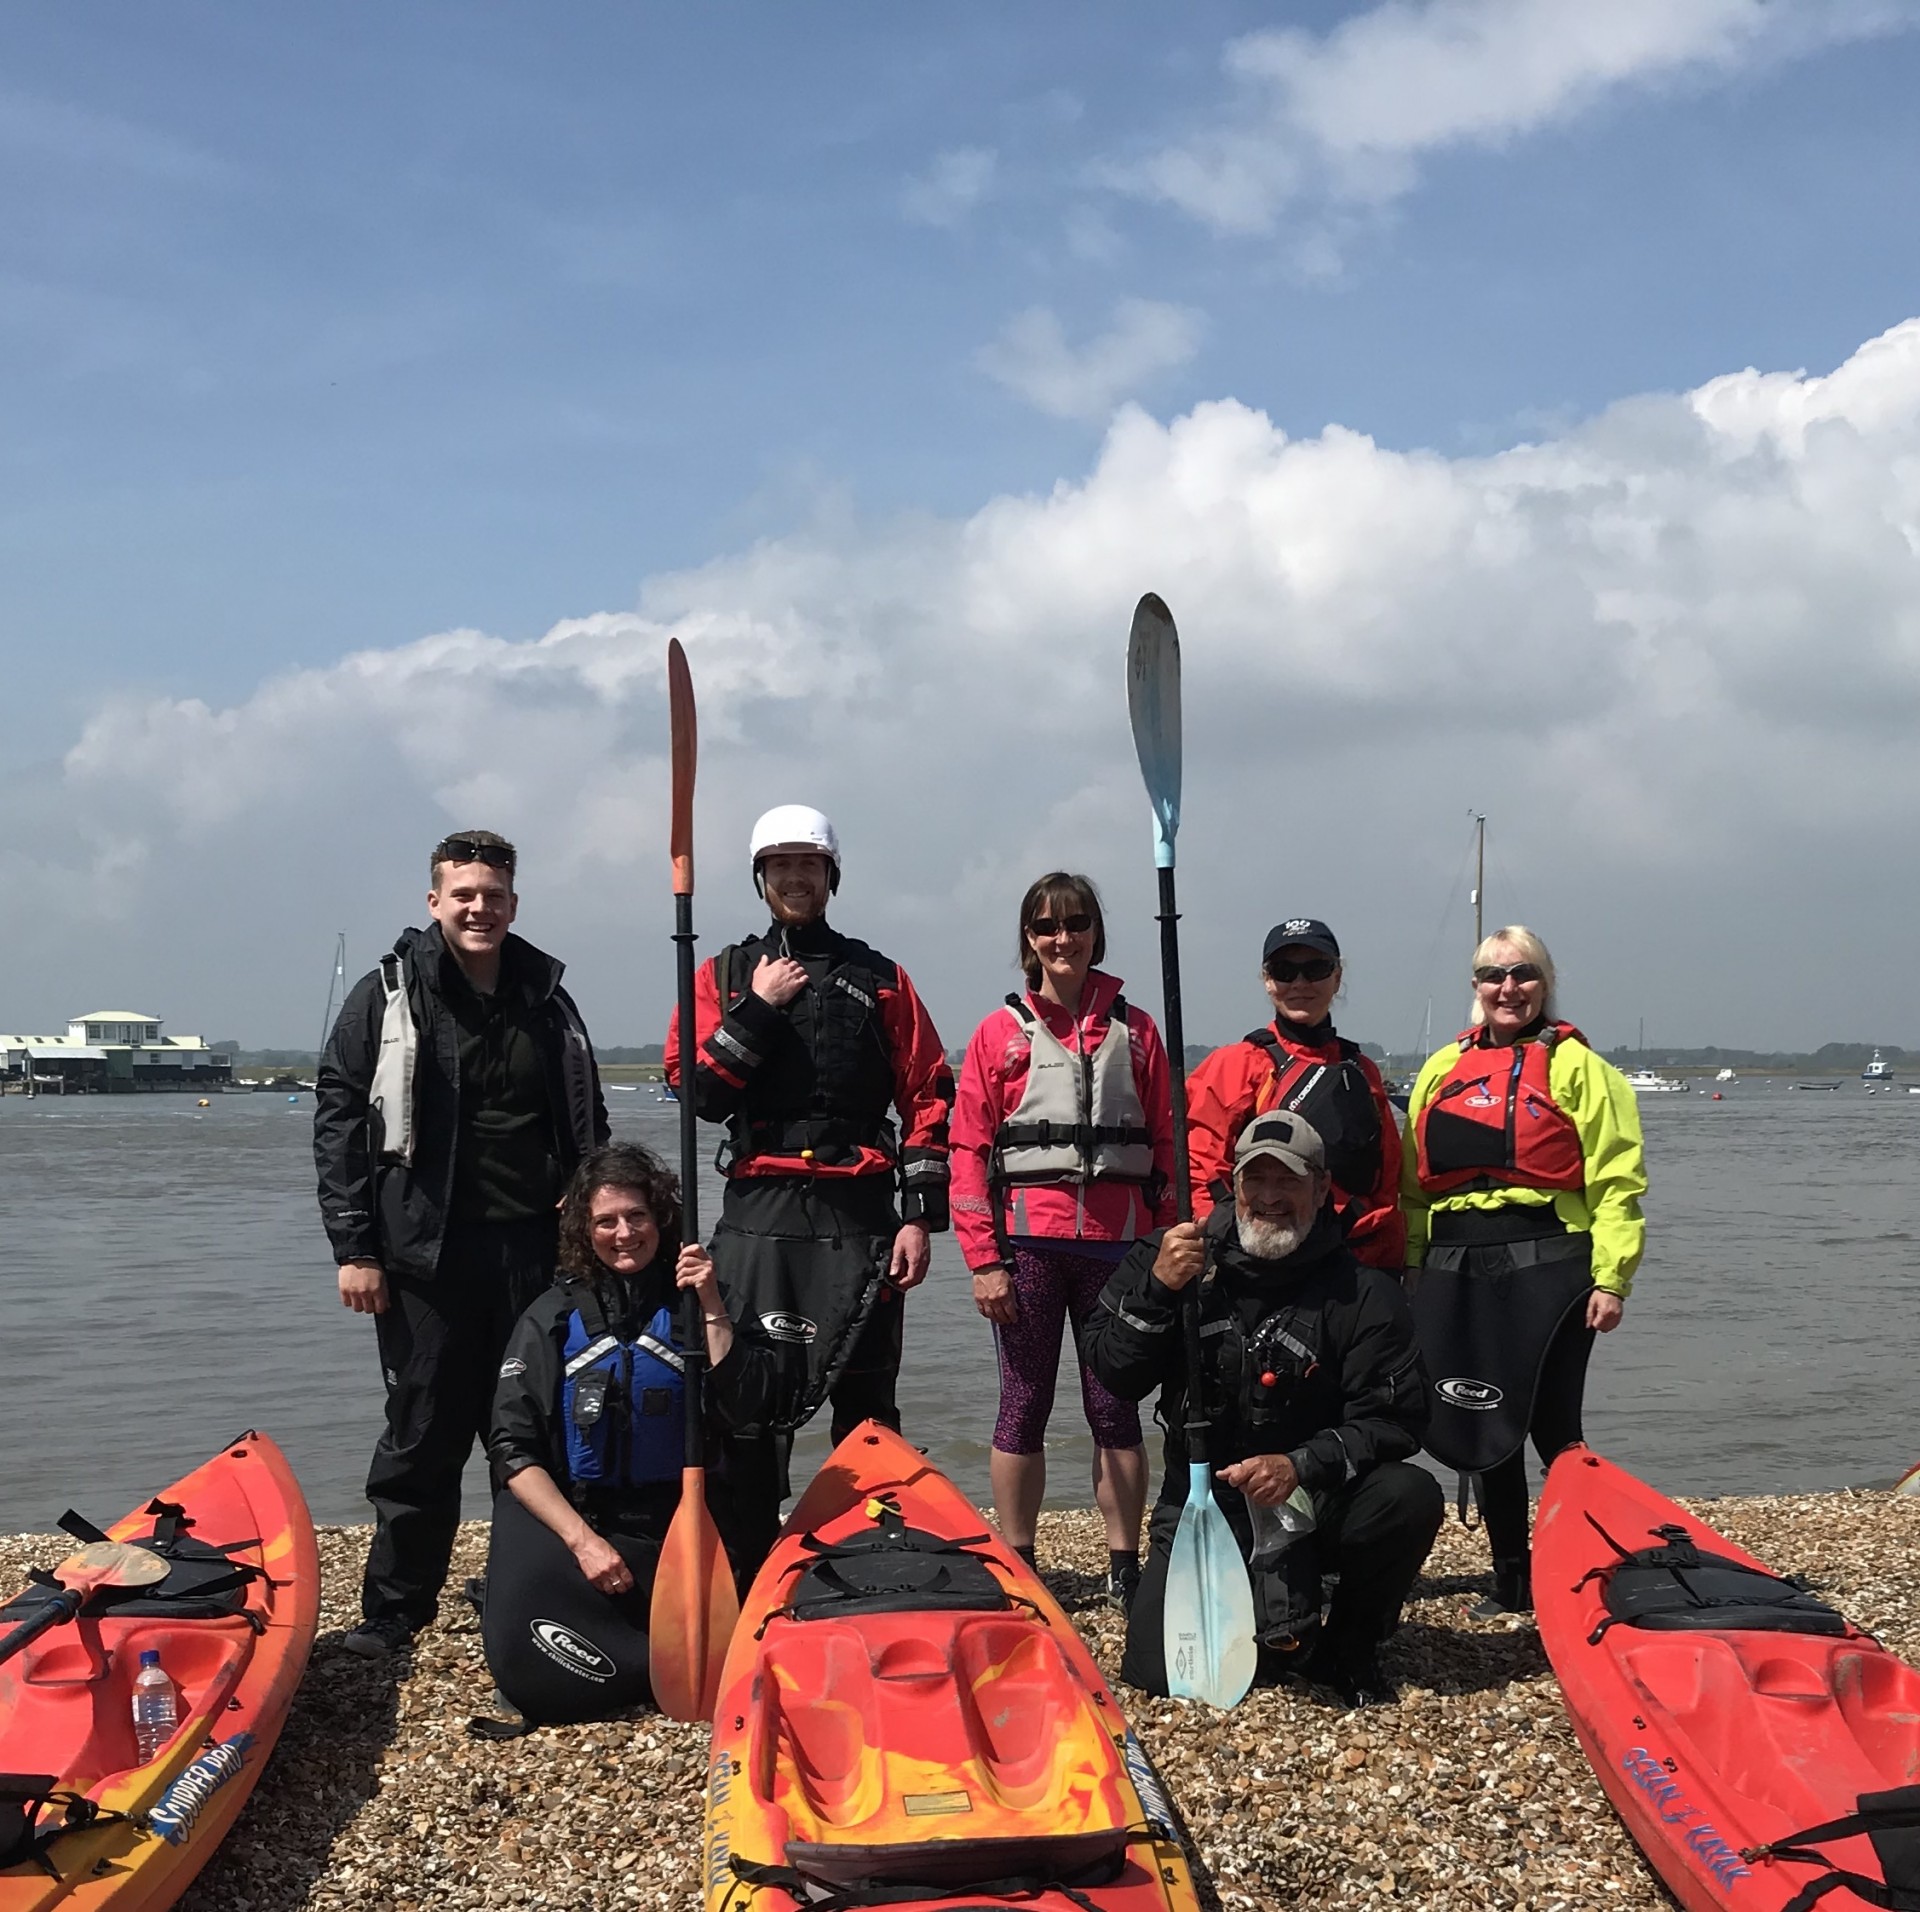 Small group of kayakers posing on a beach with the Deben estuary in the background.